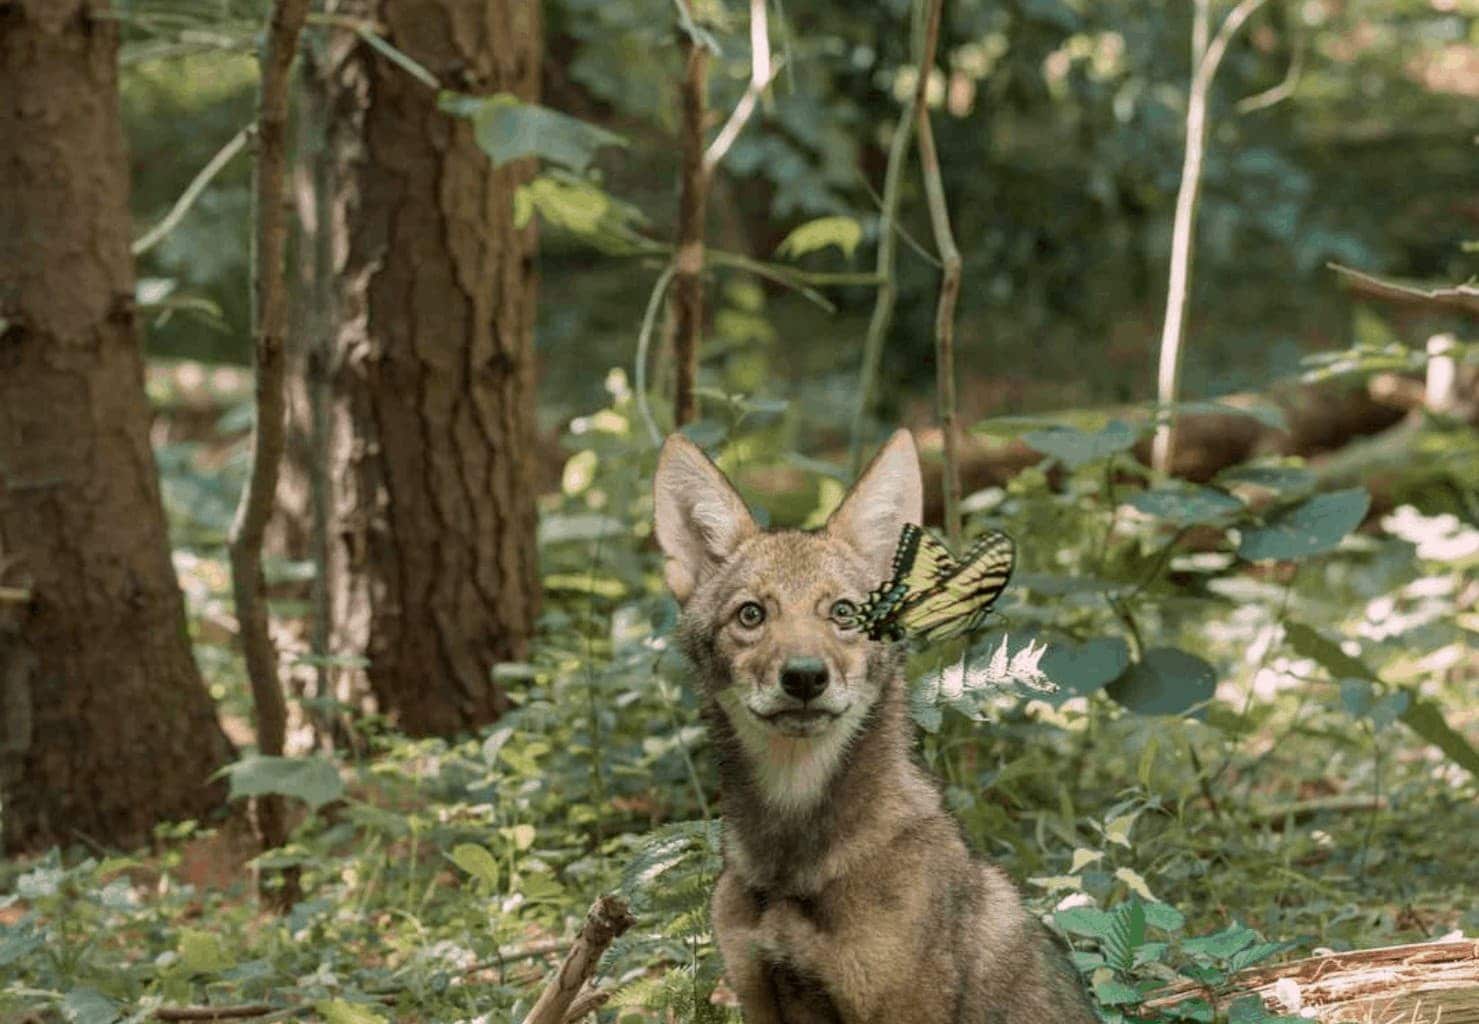 A coyote encounters a butterfly in the IMAX documentary "Backyard Wilderness." Courtesy of Amber Hawtin